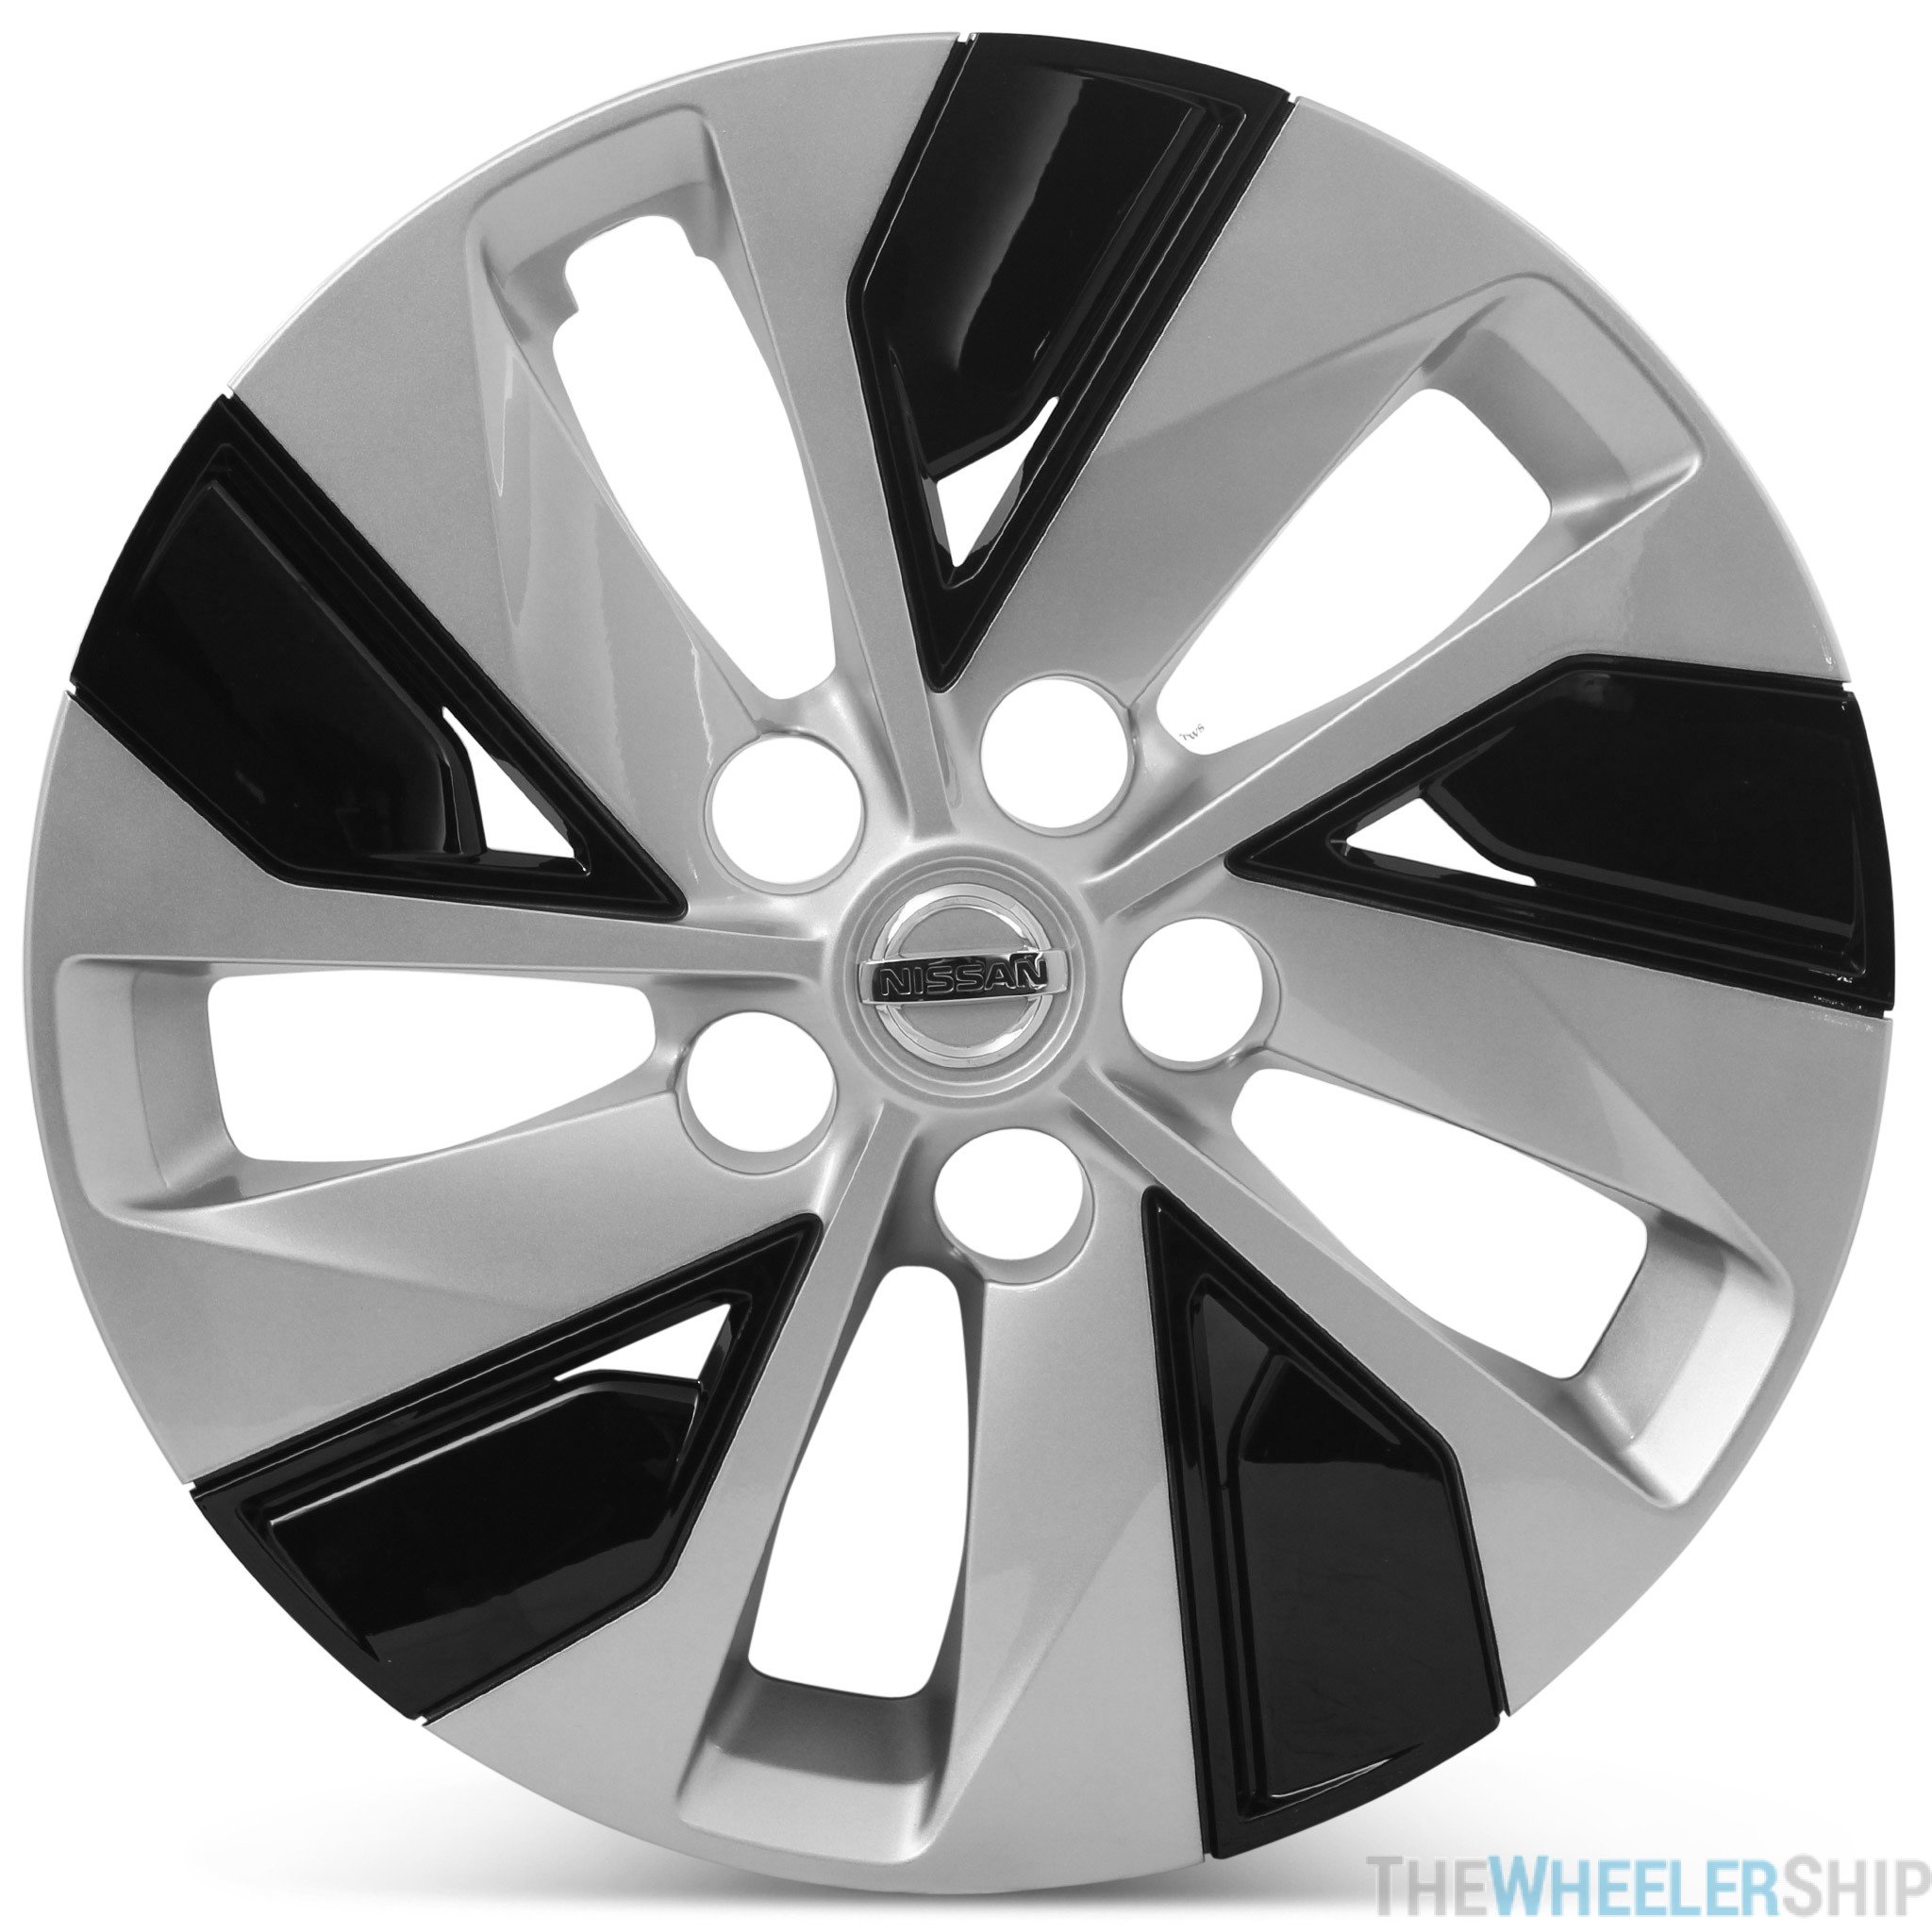 16 hubcaps wheel covers